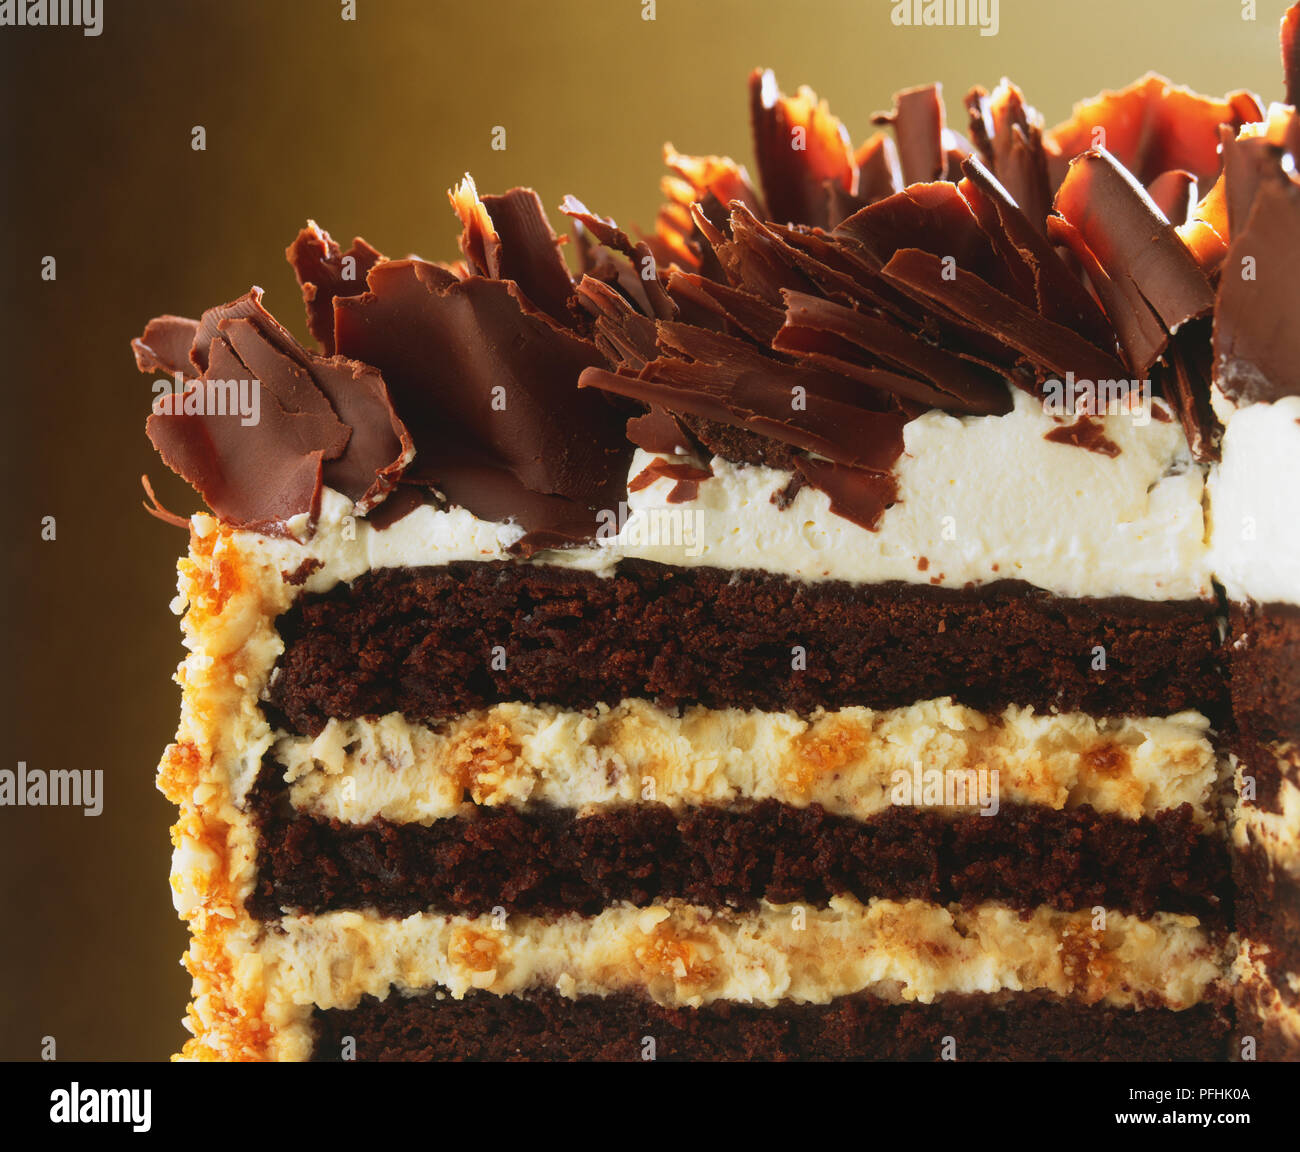 Cross-section of cream layer-cake decorated with chocolate curls and nuts,  close up Stock Photo - Alamy